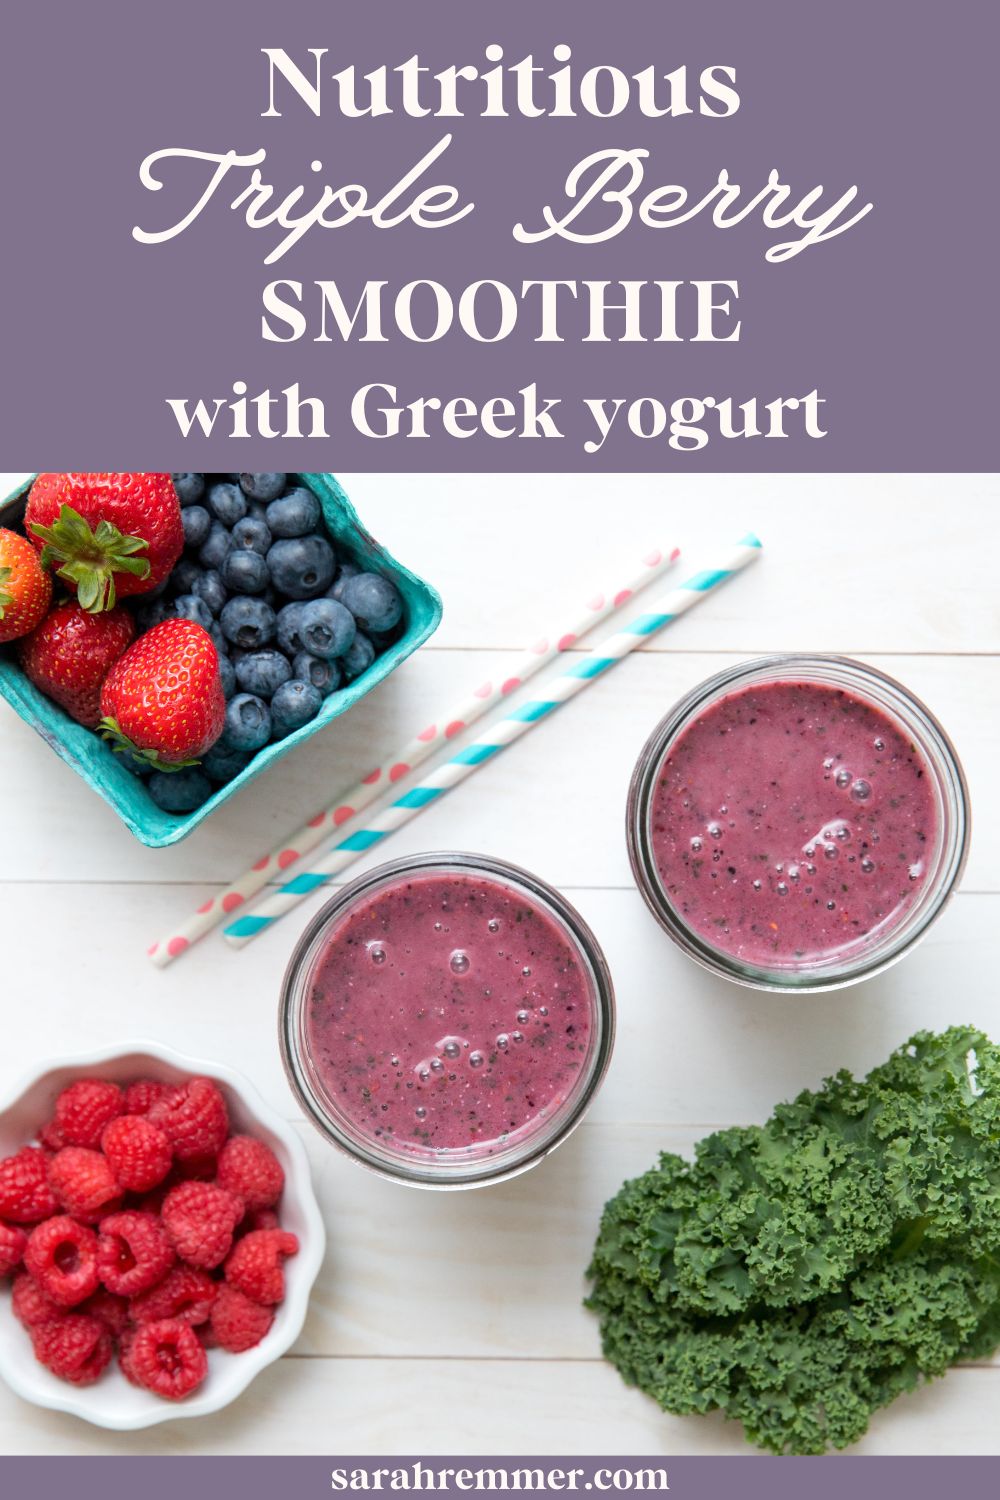 This healthy triple berry smoothie is creamy, delicious, and packed with nutrients from 3 different berries, spinach, hemp seeds, and more.